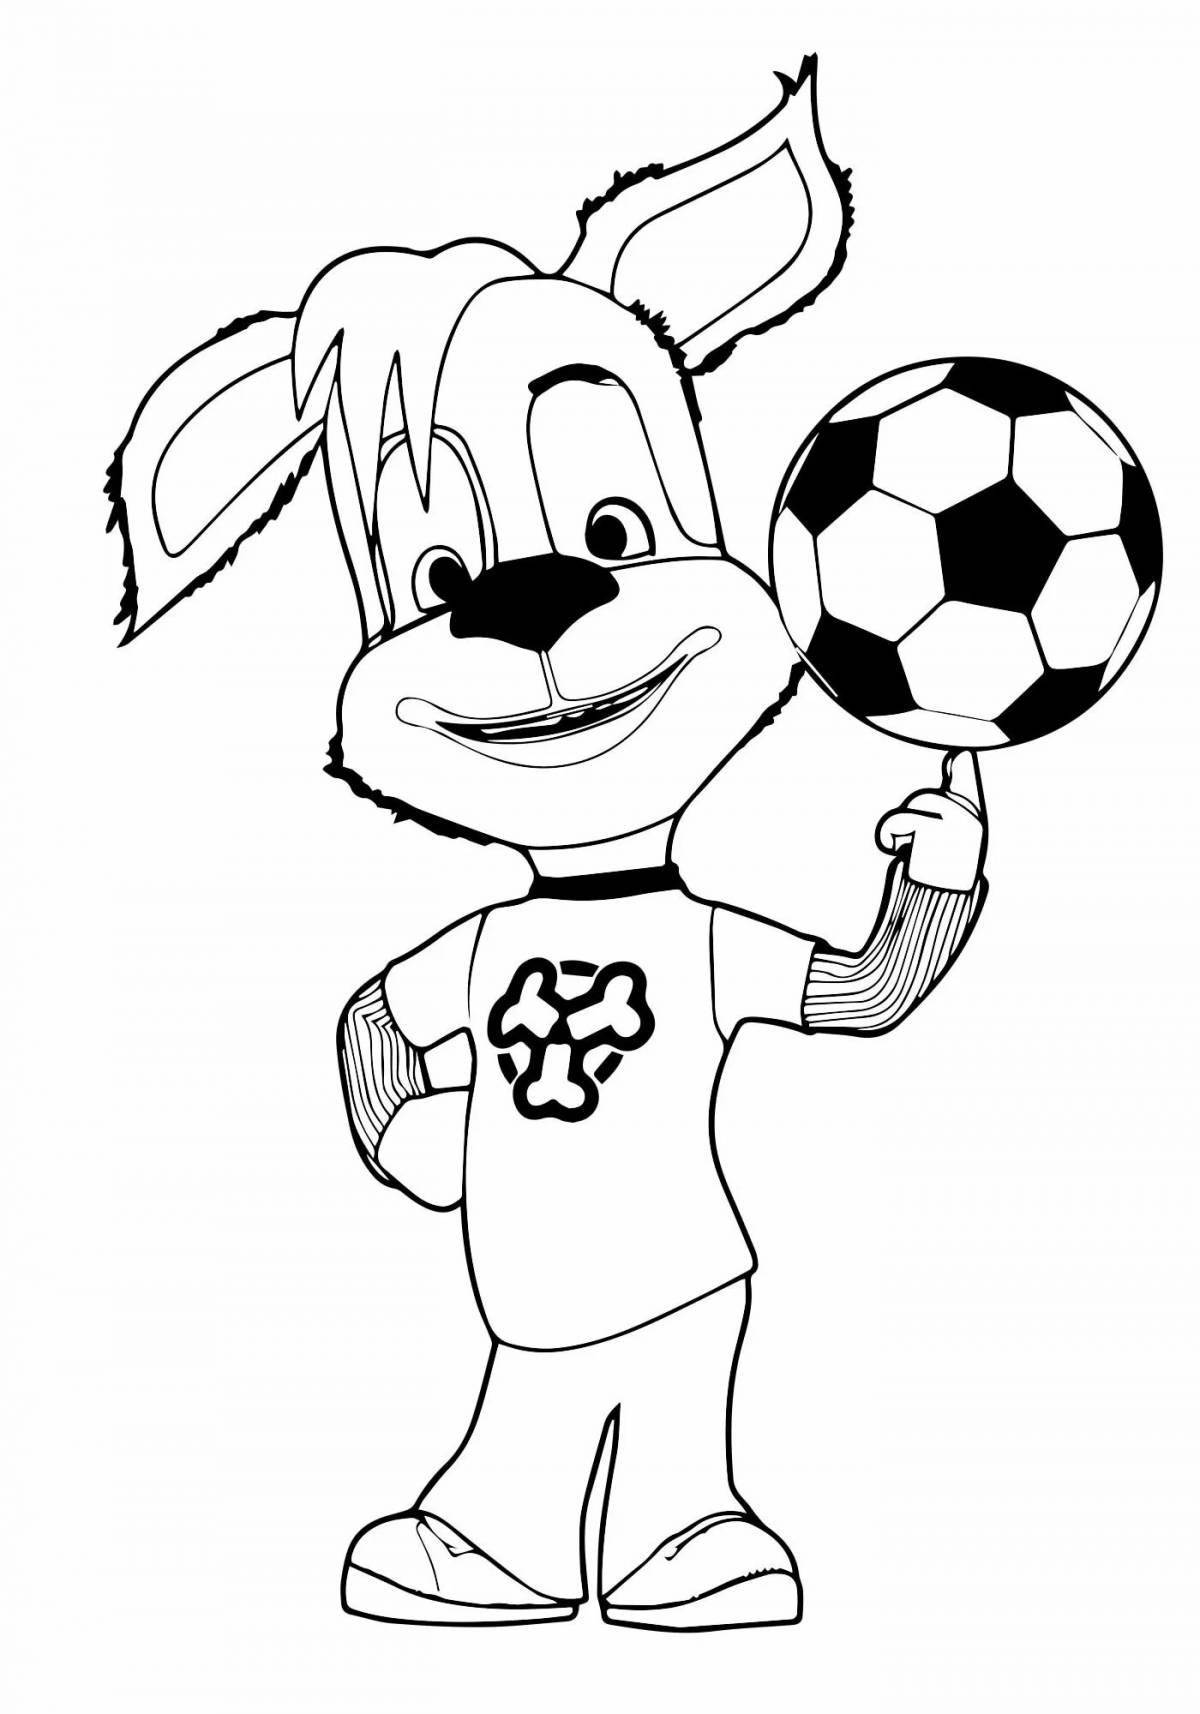 Color-frolicsome coloring page buddy barboskin